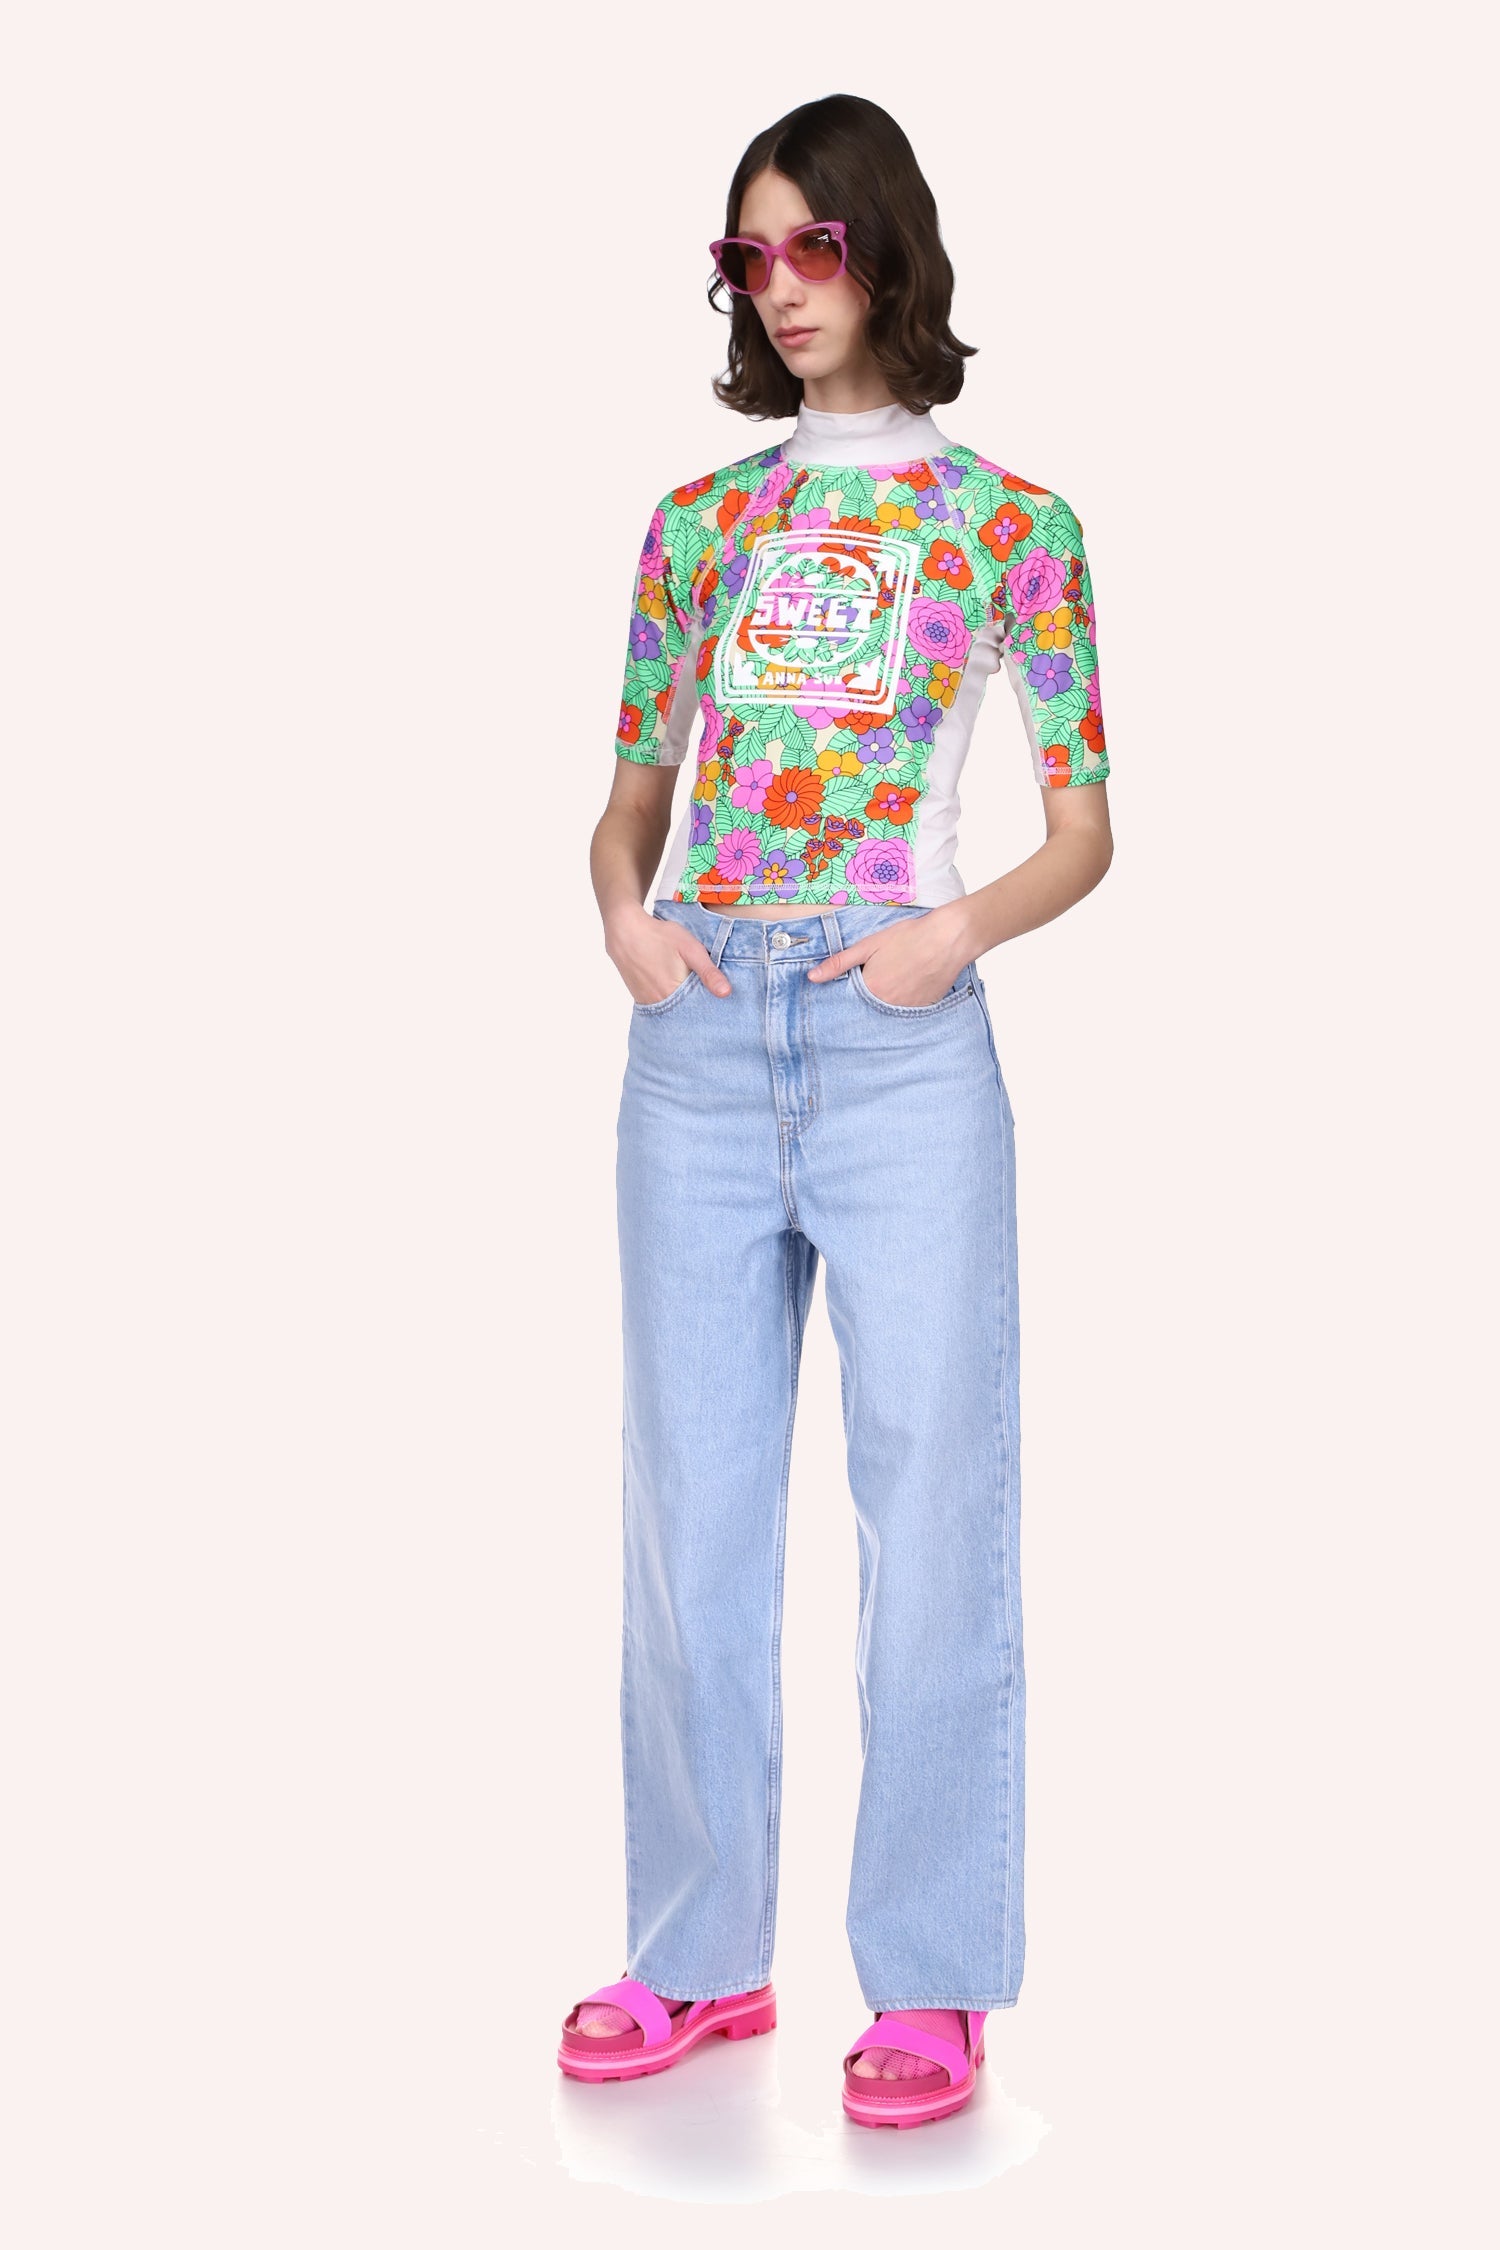 Beckoning Blossoms Surf Top in Marigold can be an asset to complement any pair of blue jeans